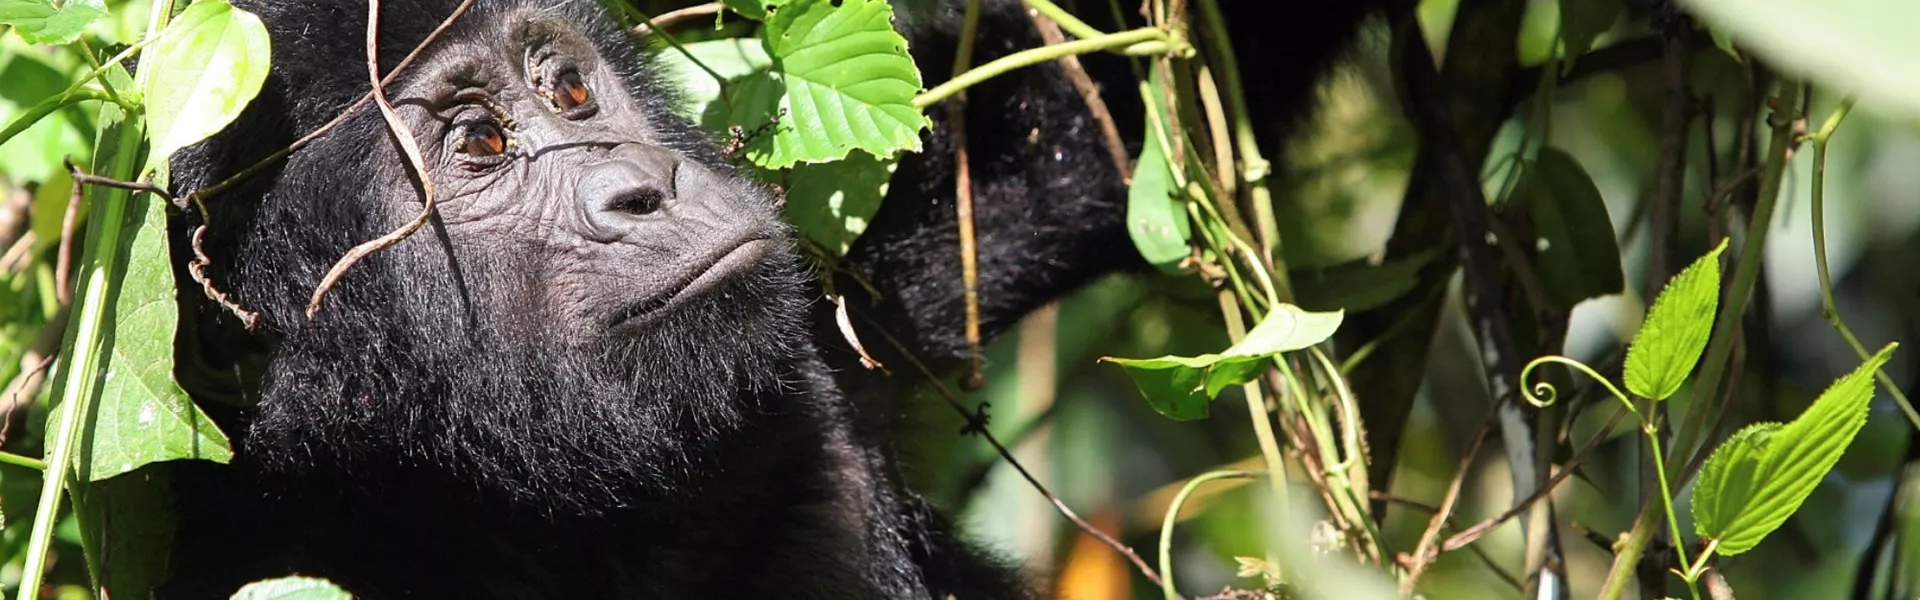 A baby gorilla in Bwindi Impenetrable Forest in Uganda